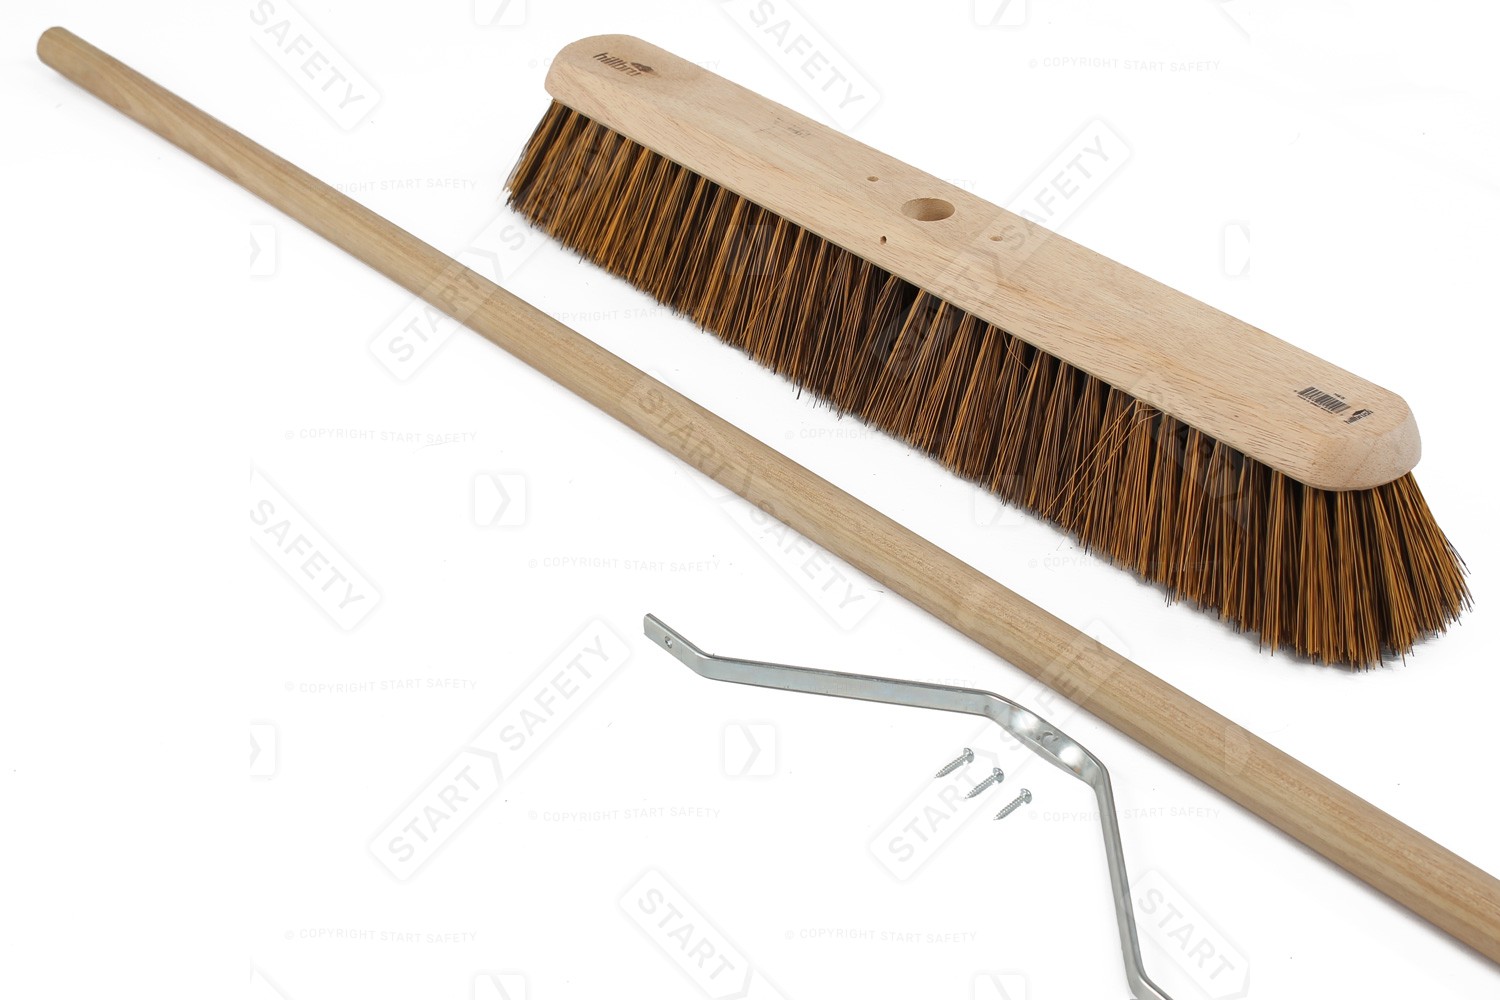 Hillbrush H4/5 With Stay And Handle